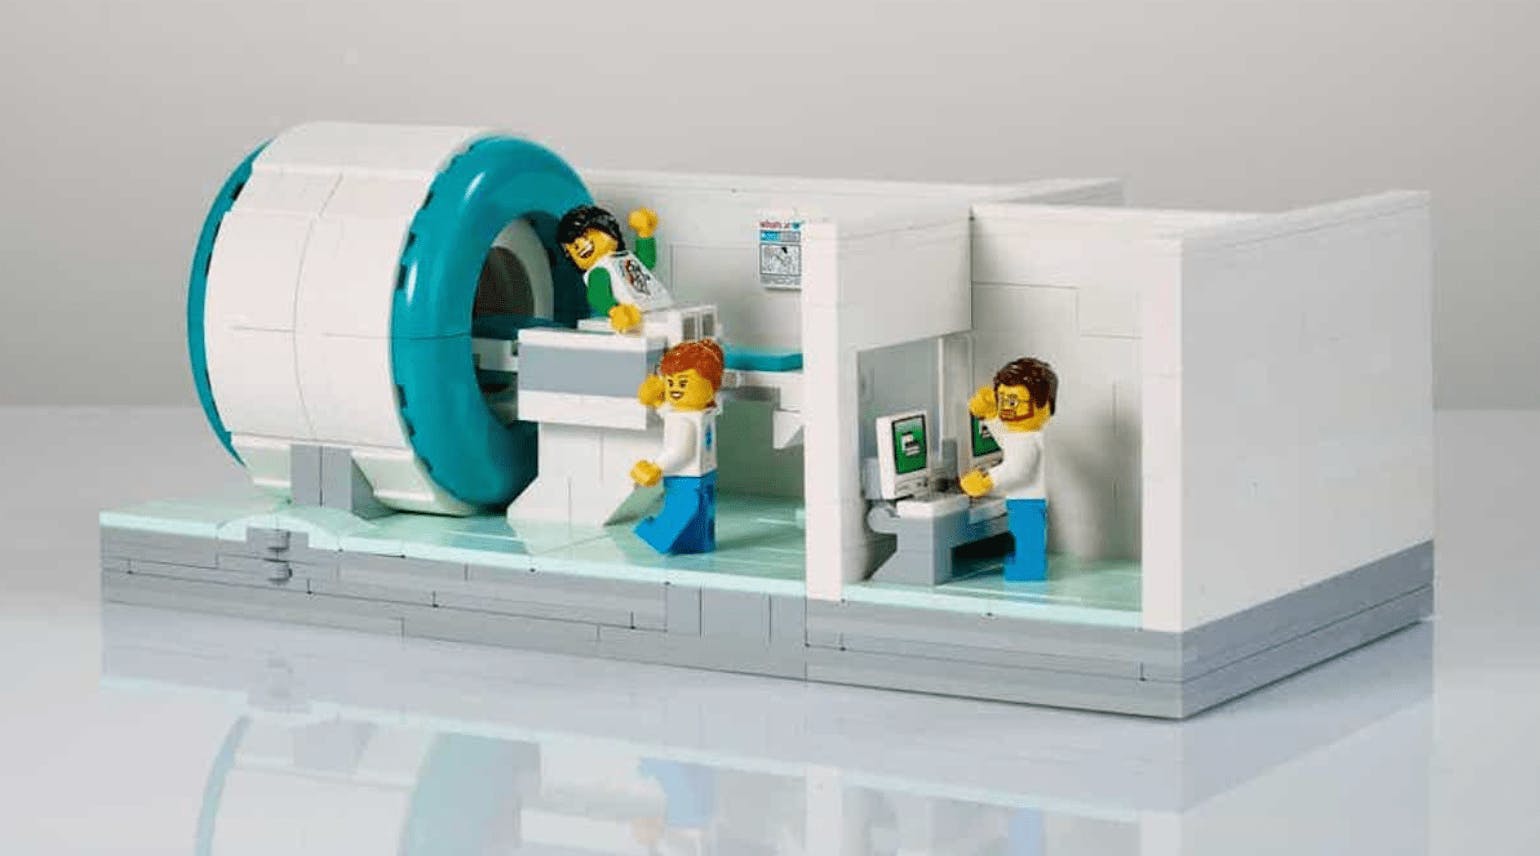 A MRI scanner made from Lego.